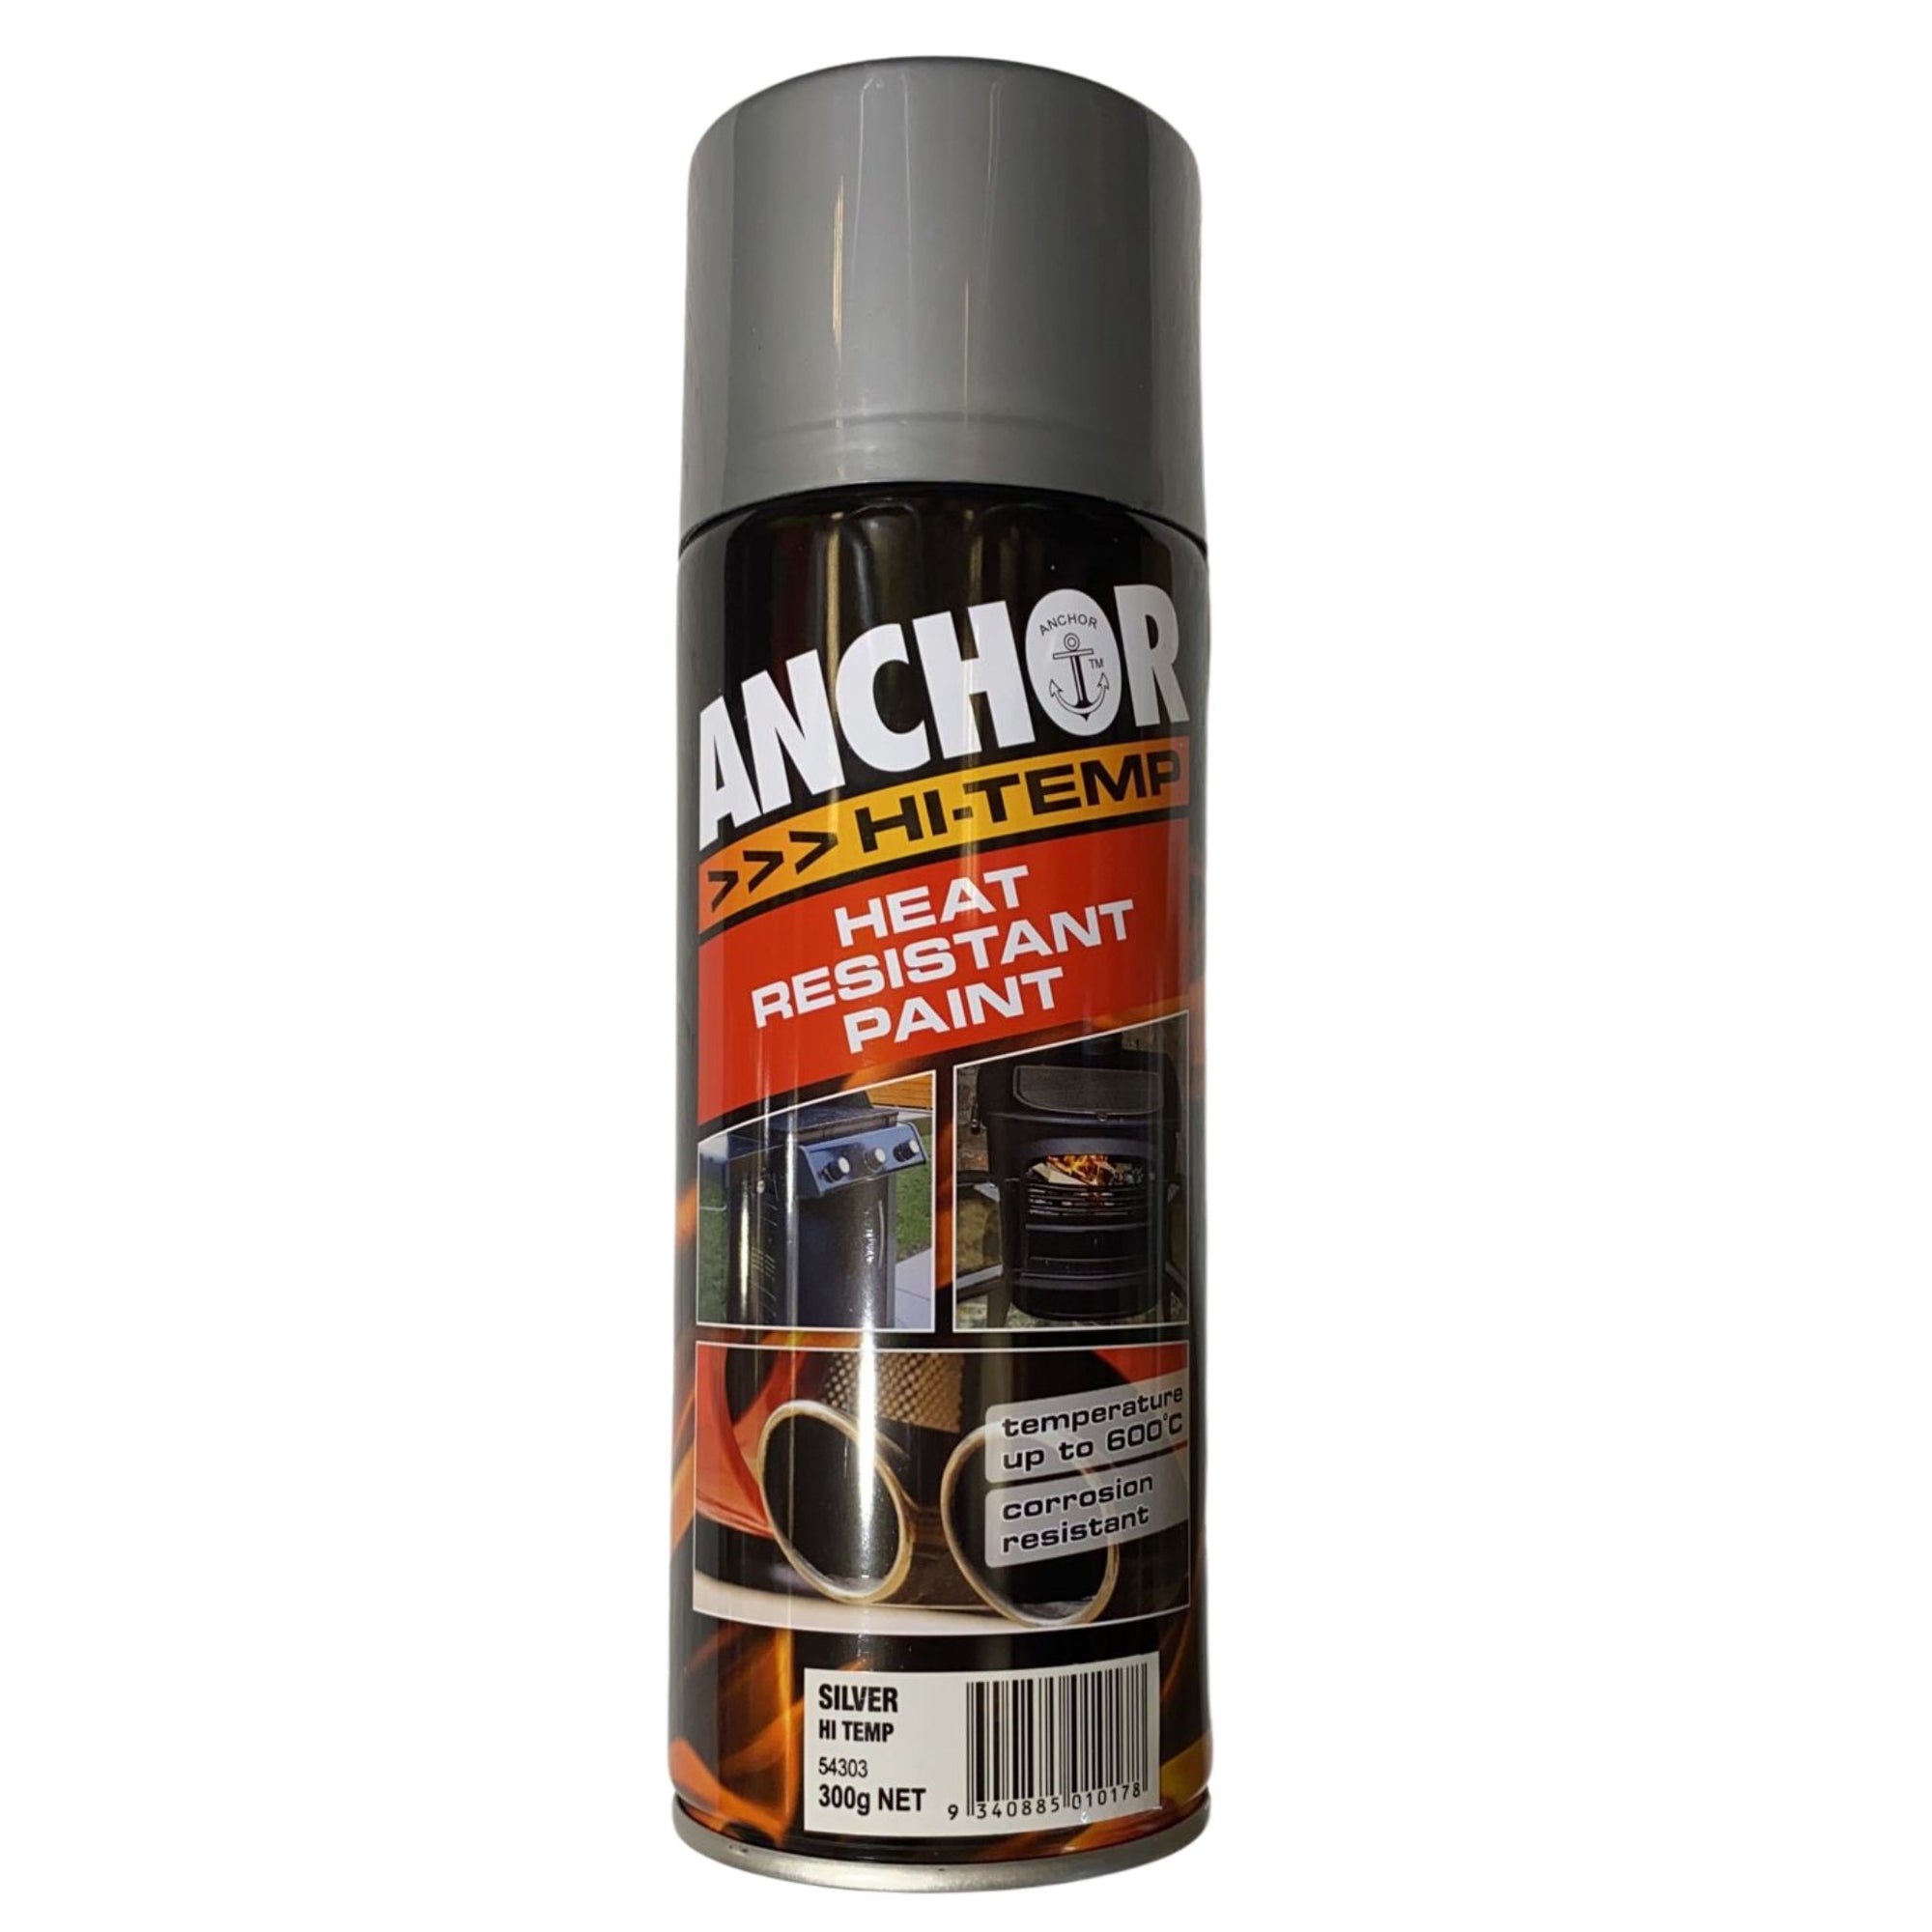 BOSTON ANCHOR HI TEMP HEAT RESISTANT PAINT  | Up to 600° | 300g - SILVER - South East Clearance Centre